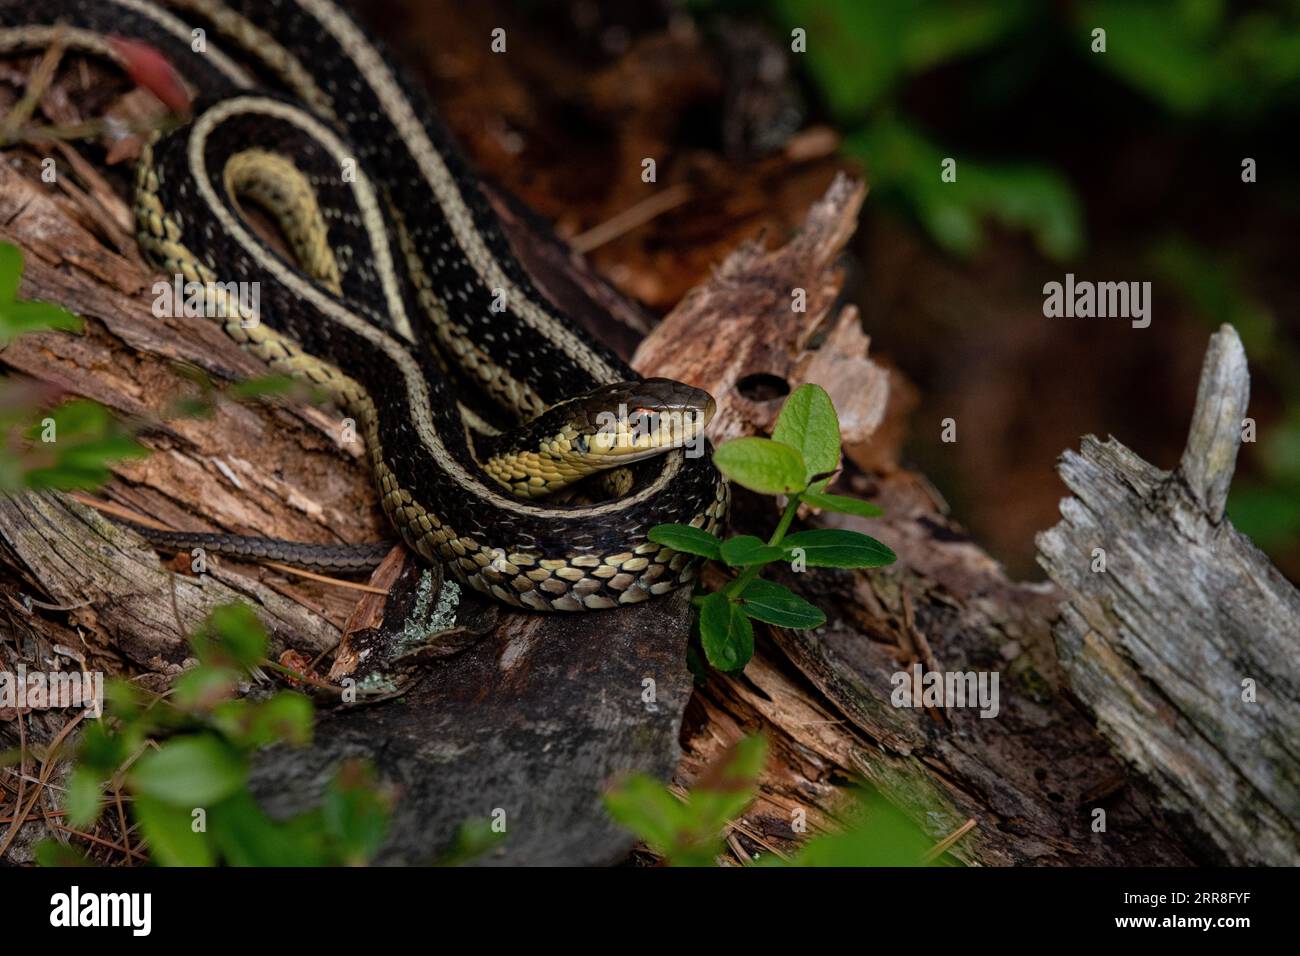 A close-up shot of a snake coiling around a tree branch, its mouth full of foliage Stock Photo